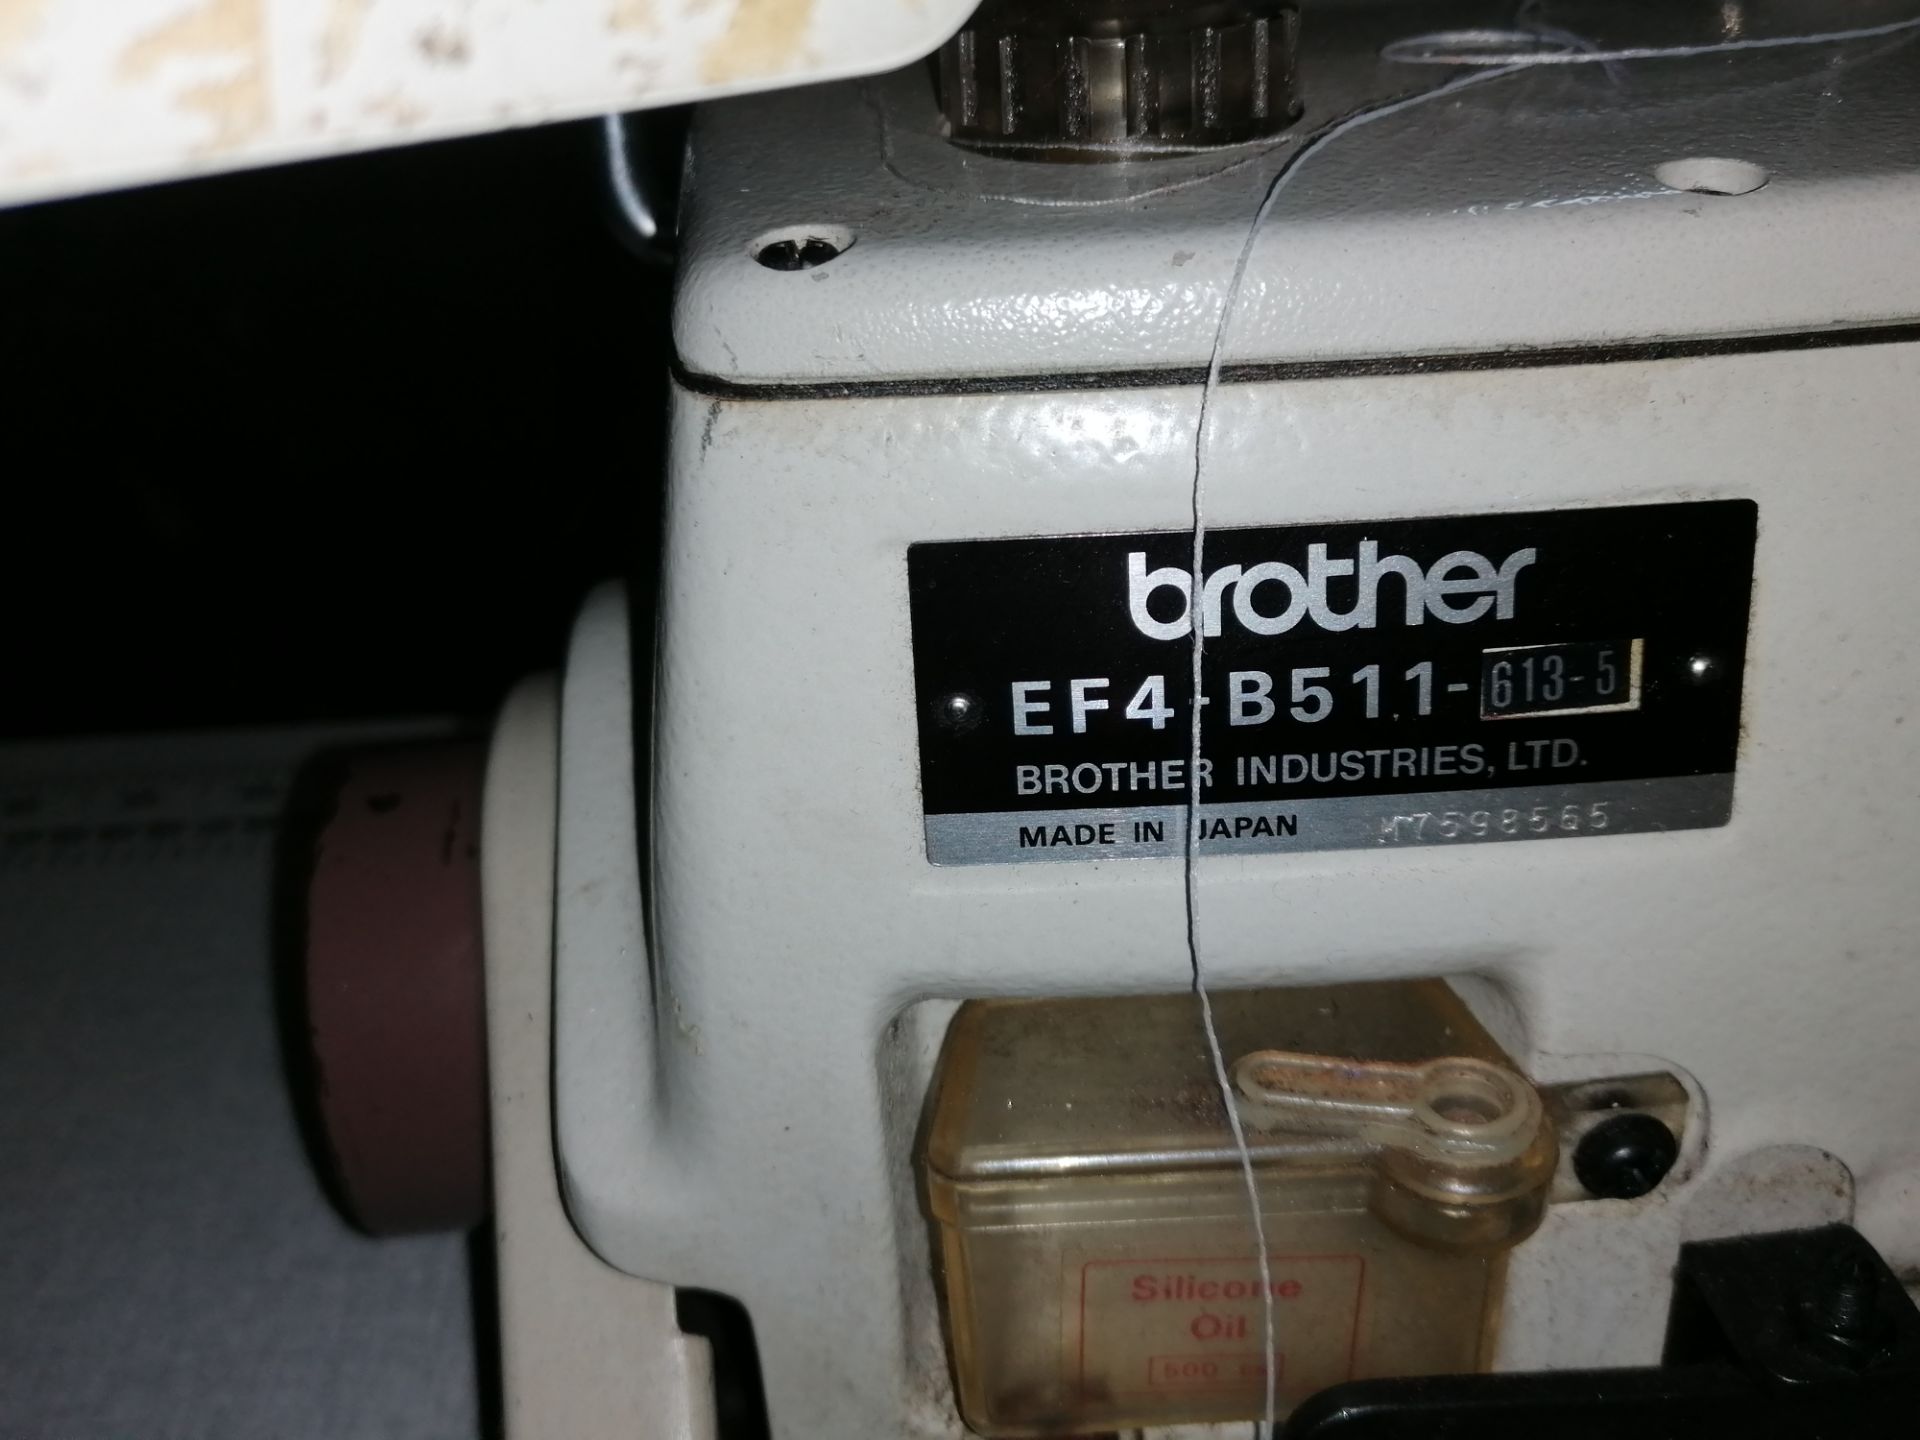 Brother EF4 - B511 613-5 Industrial 4 thread over locker sewing machine Serial No M7598568 - Image 5 of 5